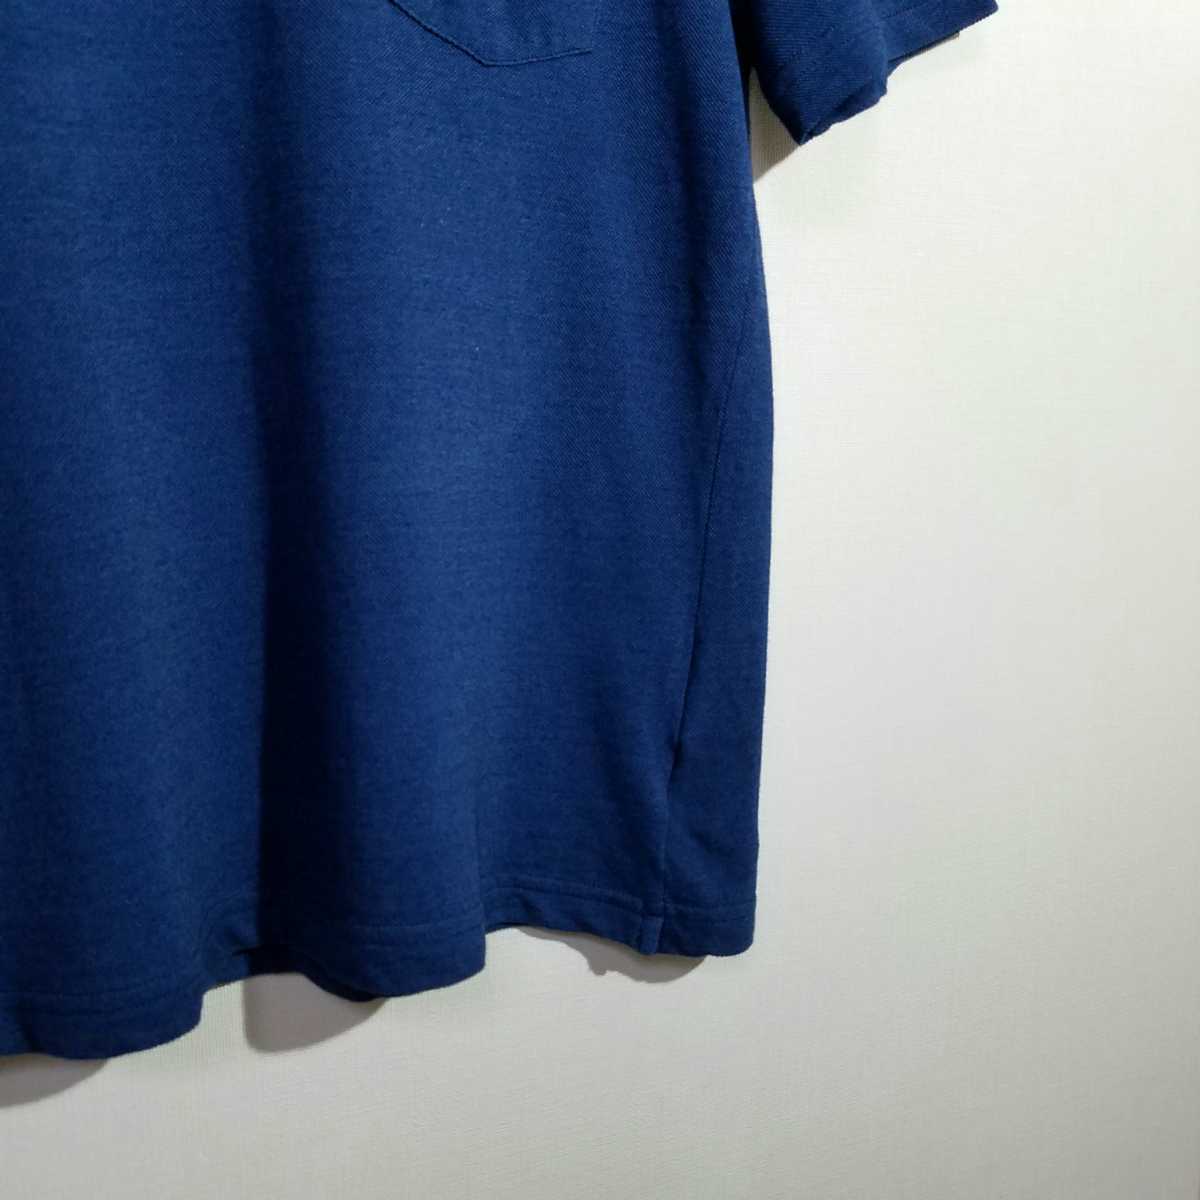 { Beams service / indigo dyeing / deer. . cloth } made in Italy GUY ROVER with pocket deer. . T-shirt XS polo-shirt gi Rover Indigo dyeing 